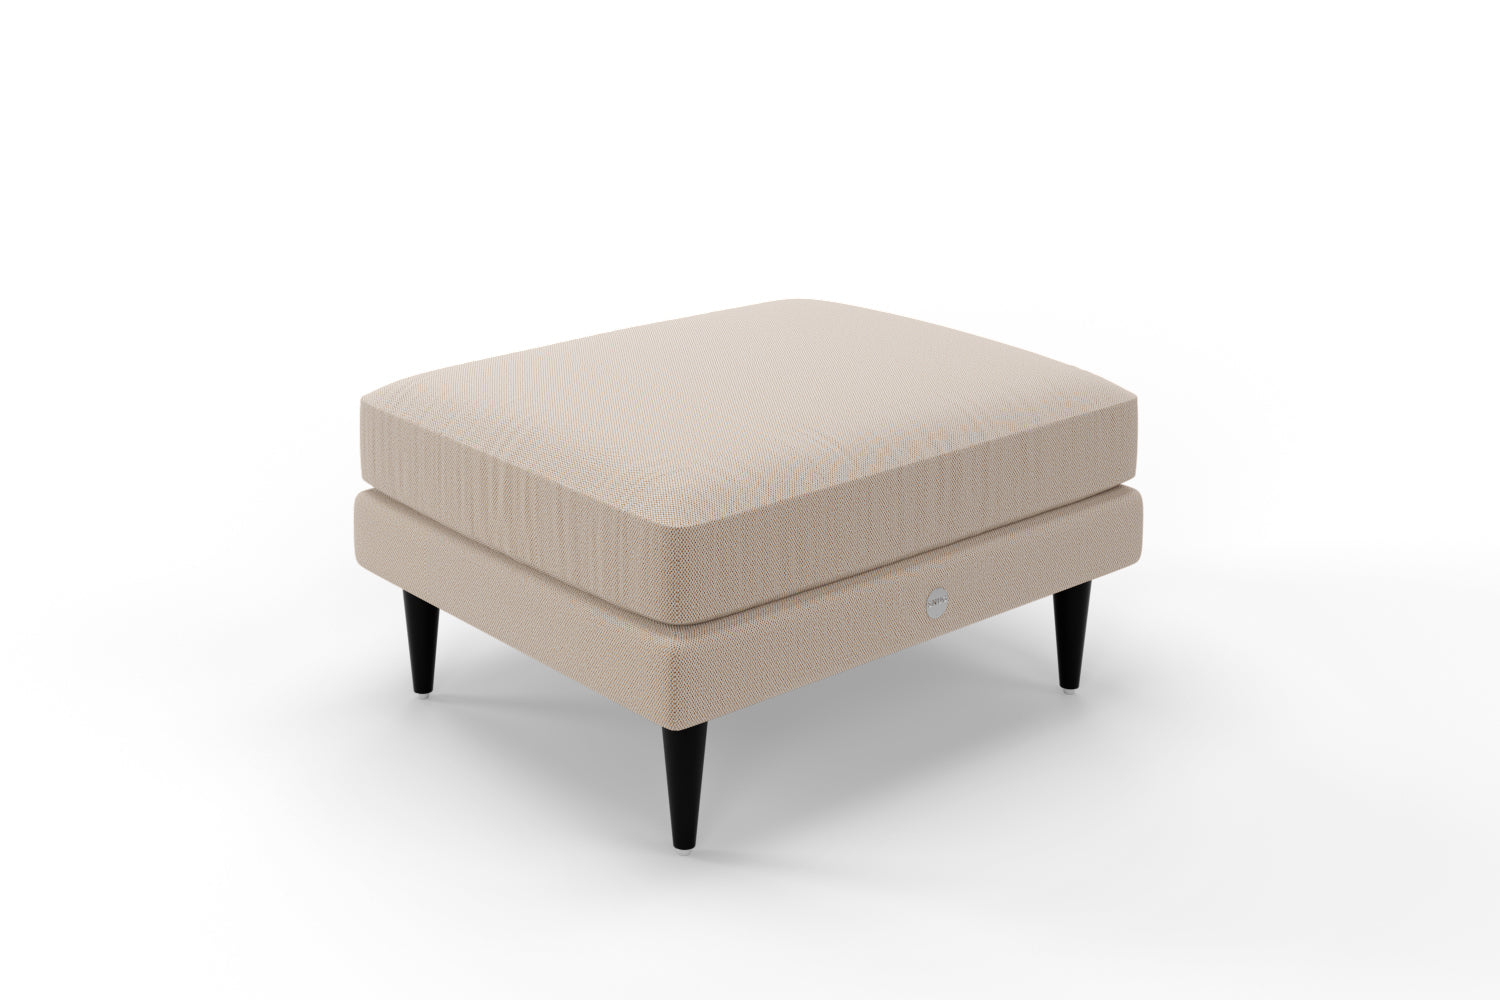 SNUG | The Big Chill Footstool in Oatmeal